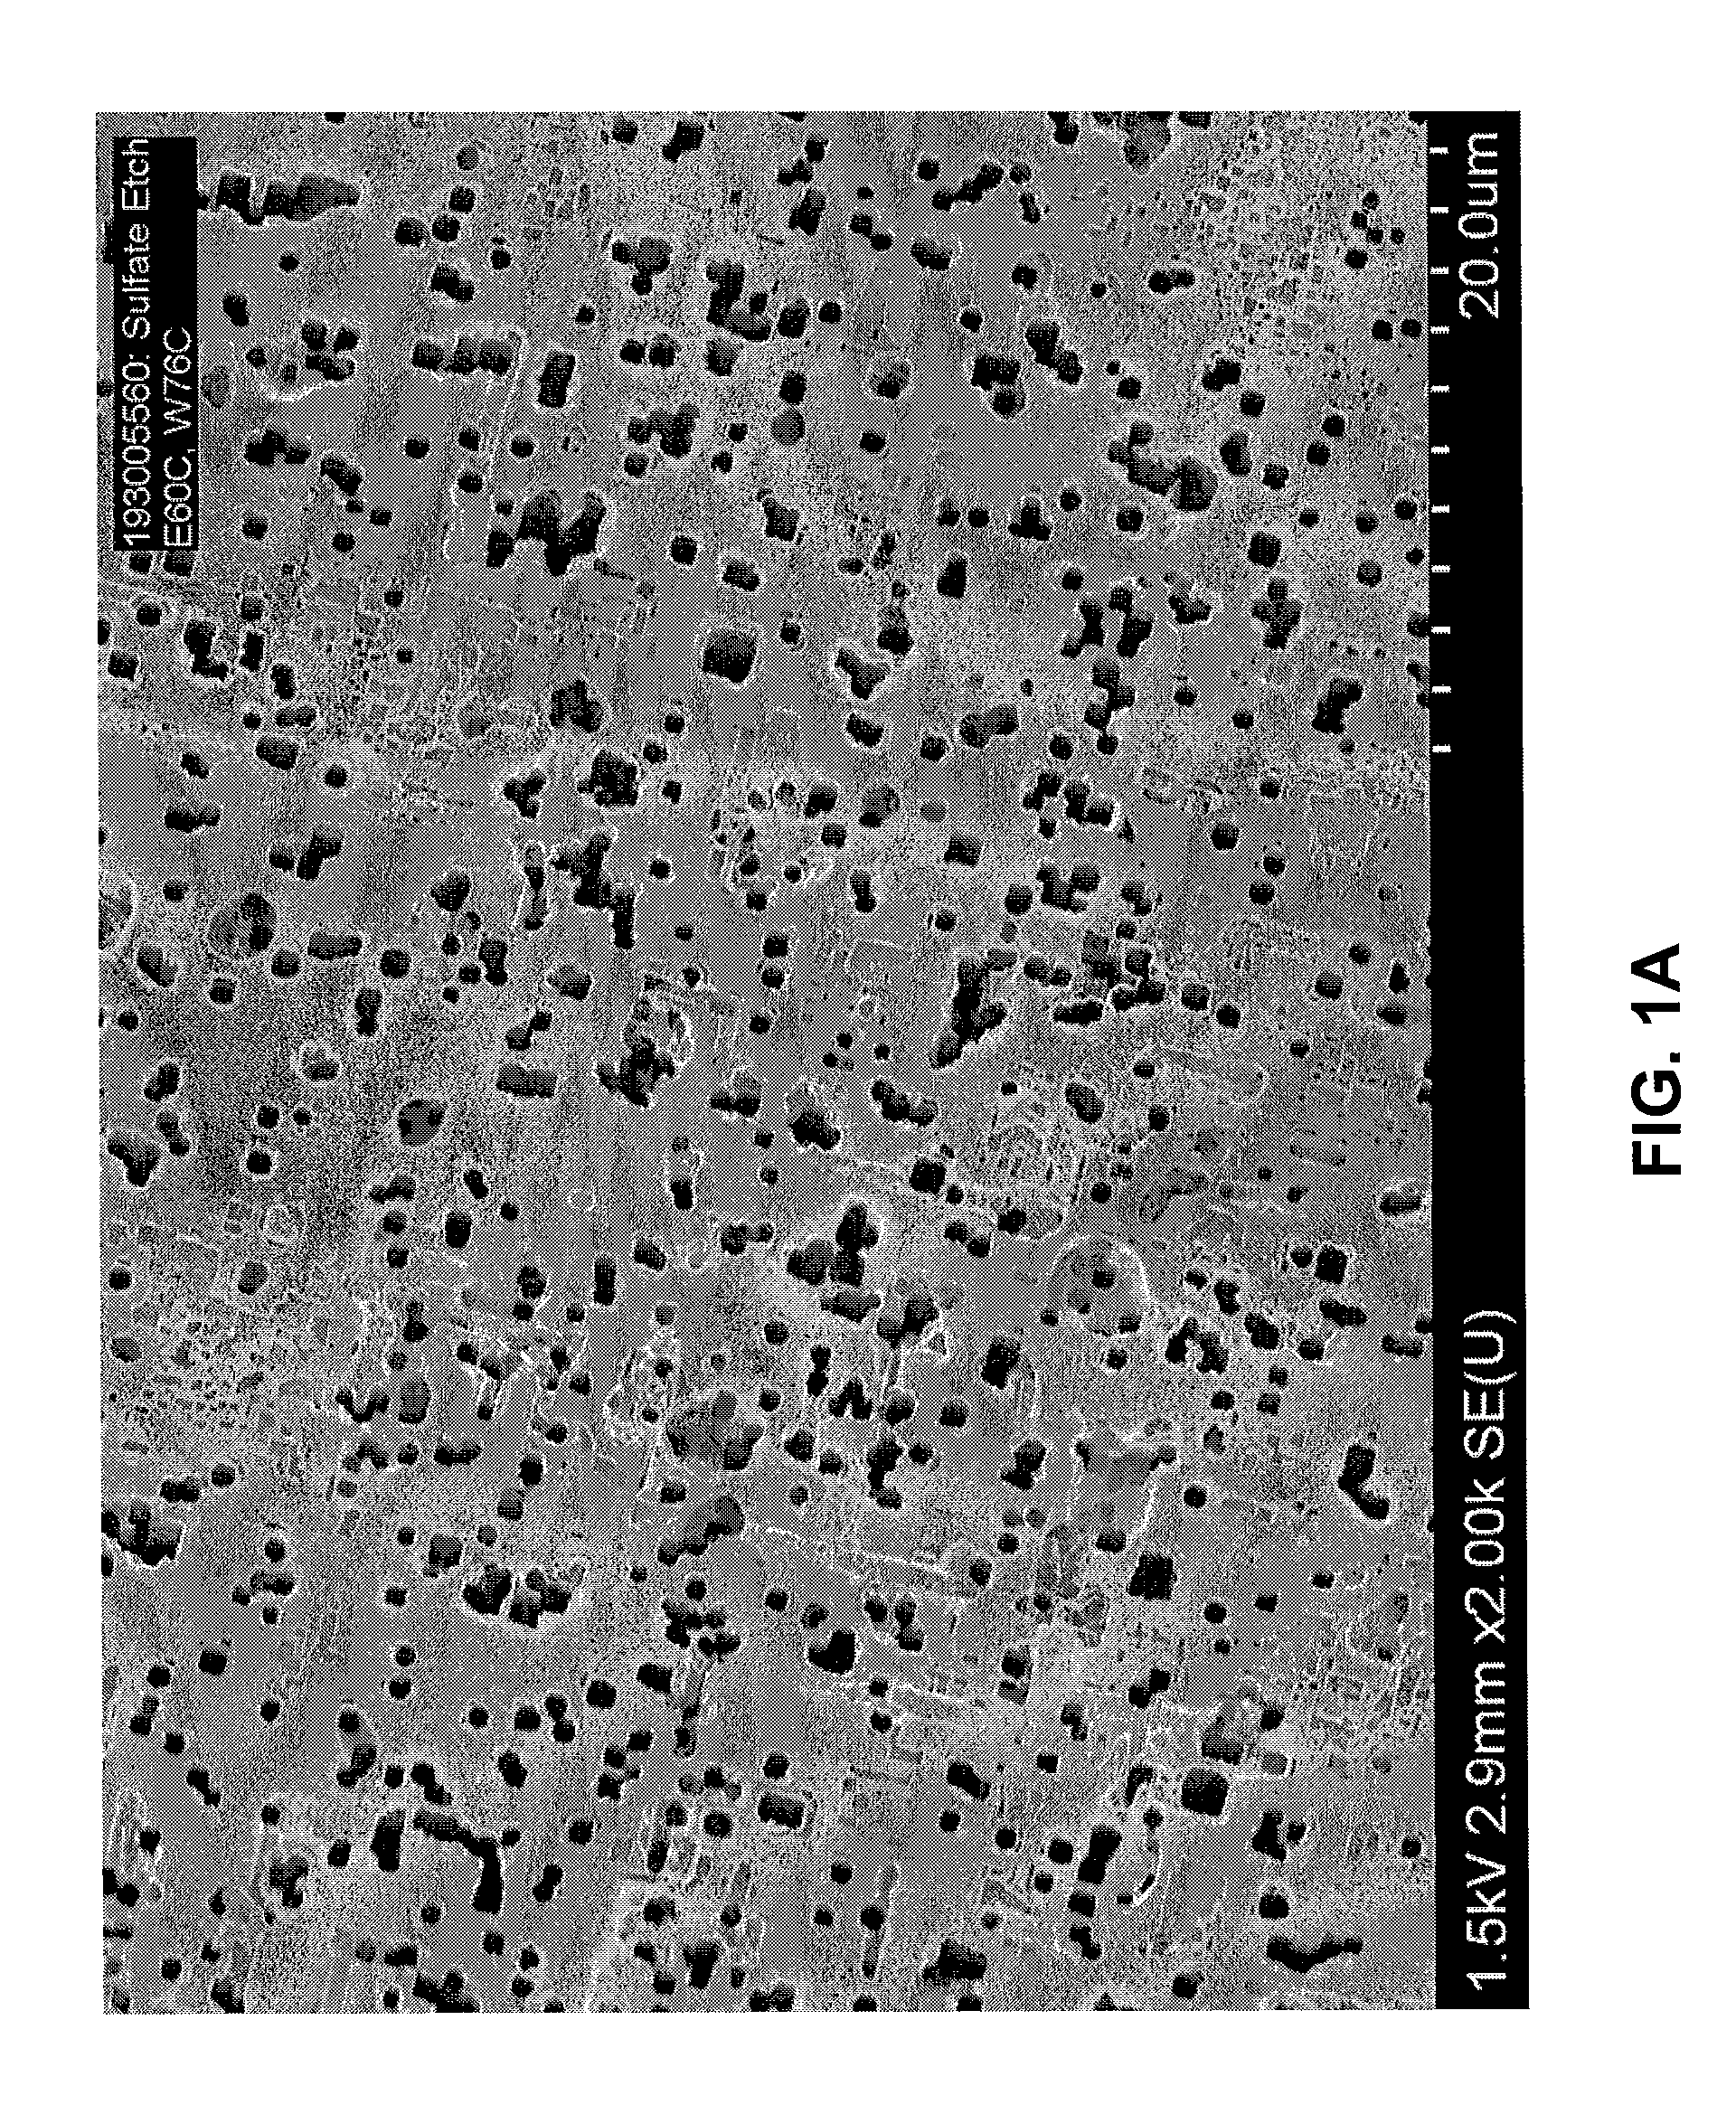 Process for producing high etch gains for electrolytic capacitor manufacturing